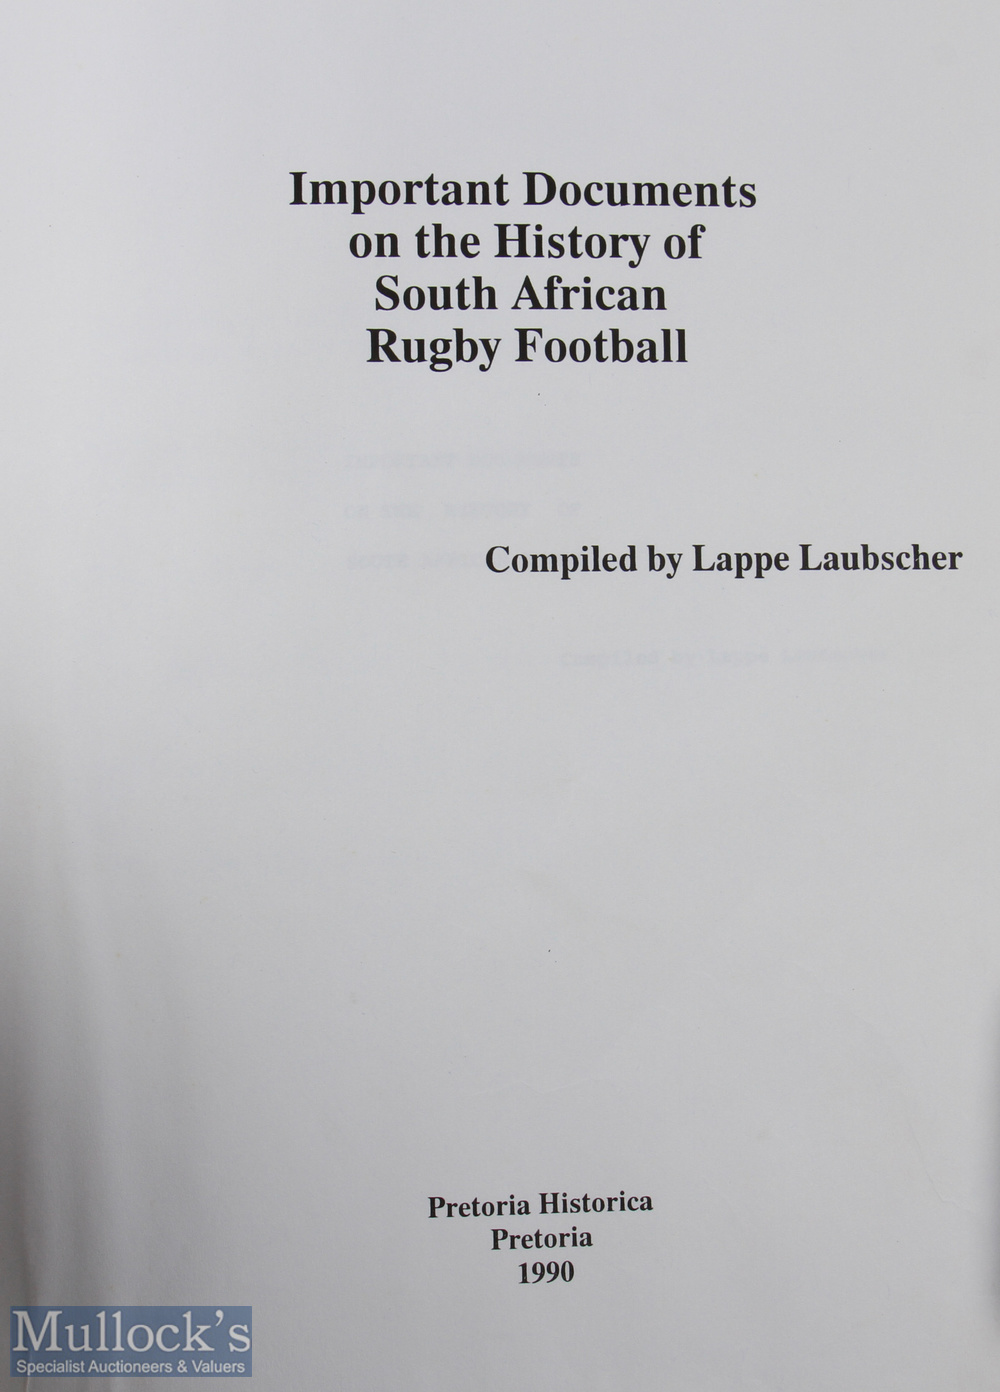 Very Rare & Special S African Rugby Documents Volume: Lappe Laubscher's personal publication in 1990 - Image 2 of 2